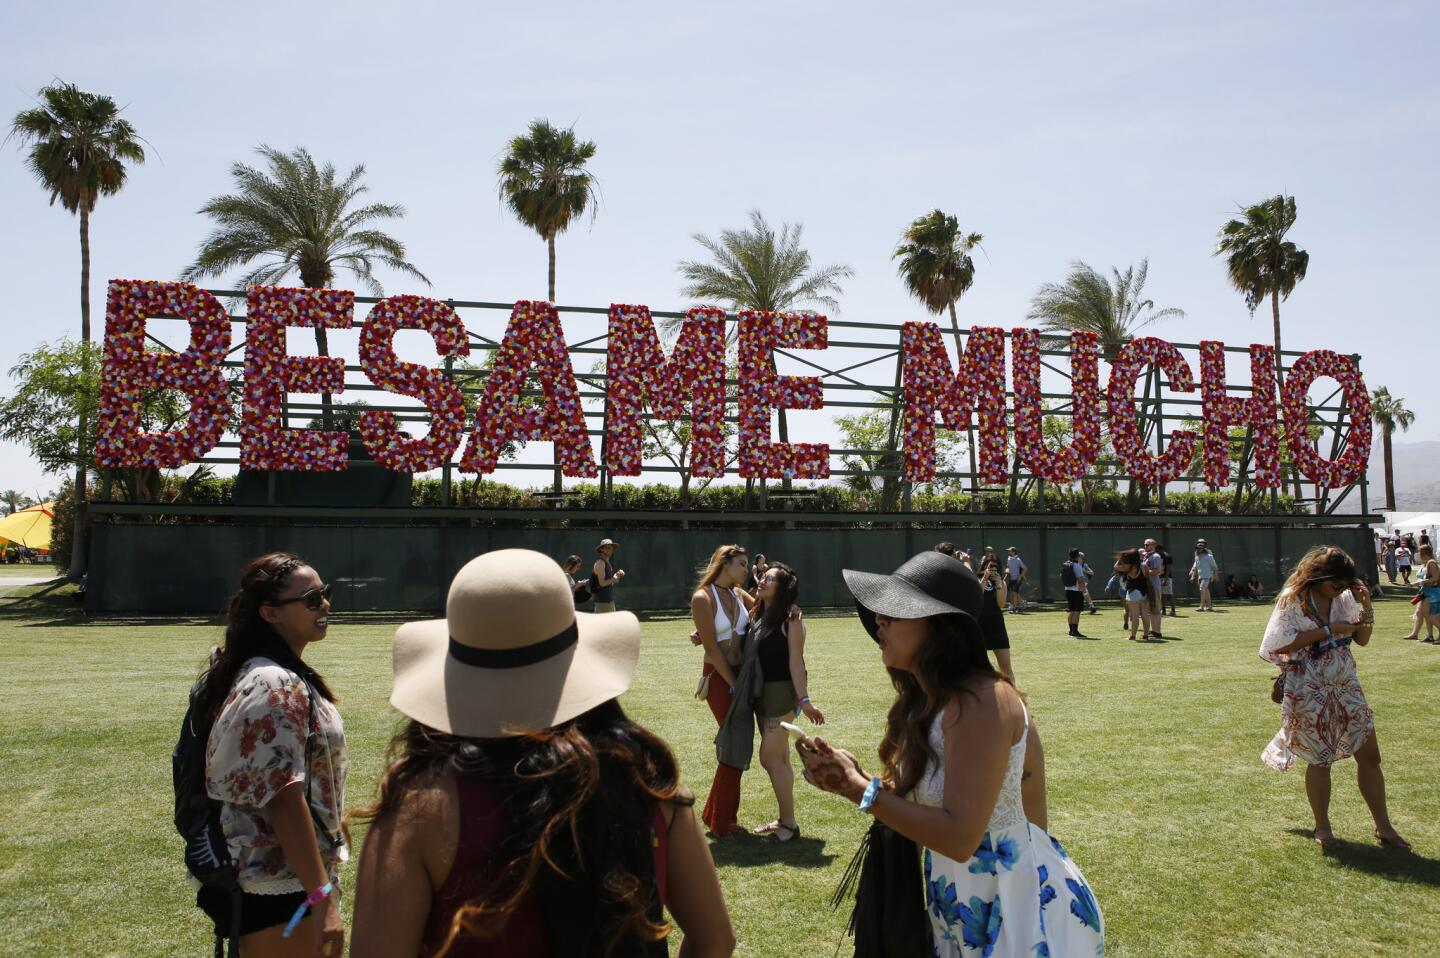 Day One: Coachella Valley Music and Arts Festival